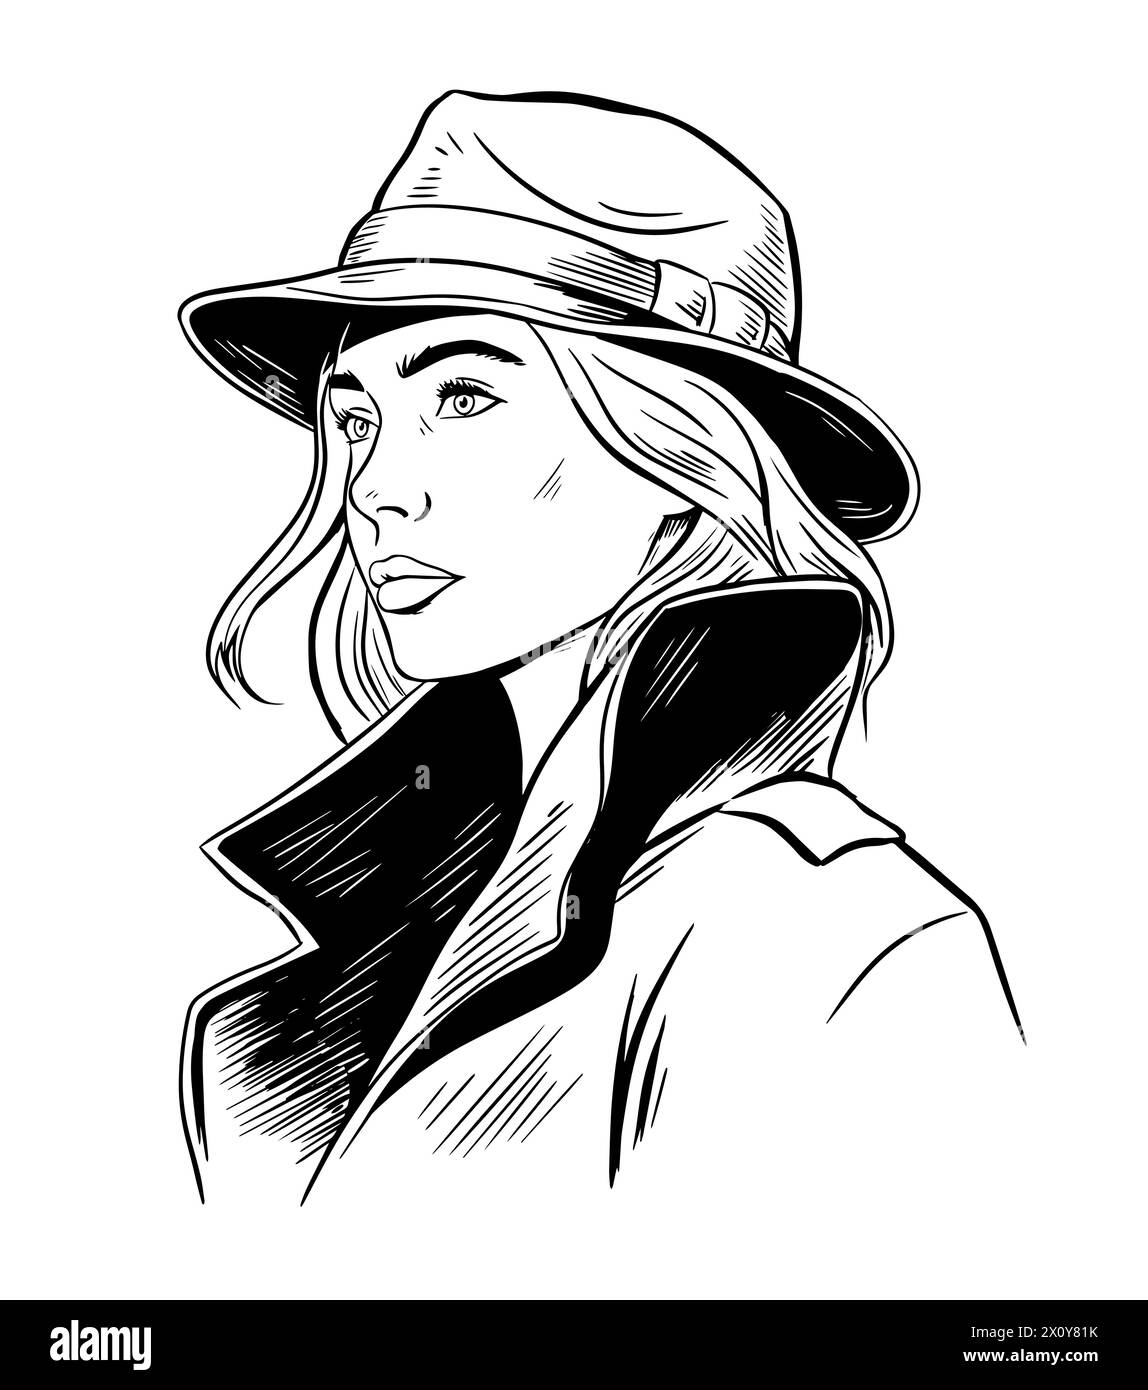 Woman detective black and white sketch Stock Vector